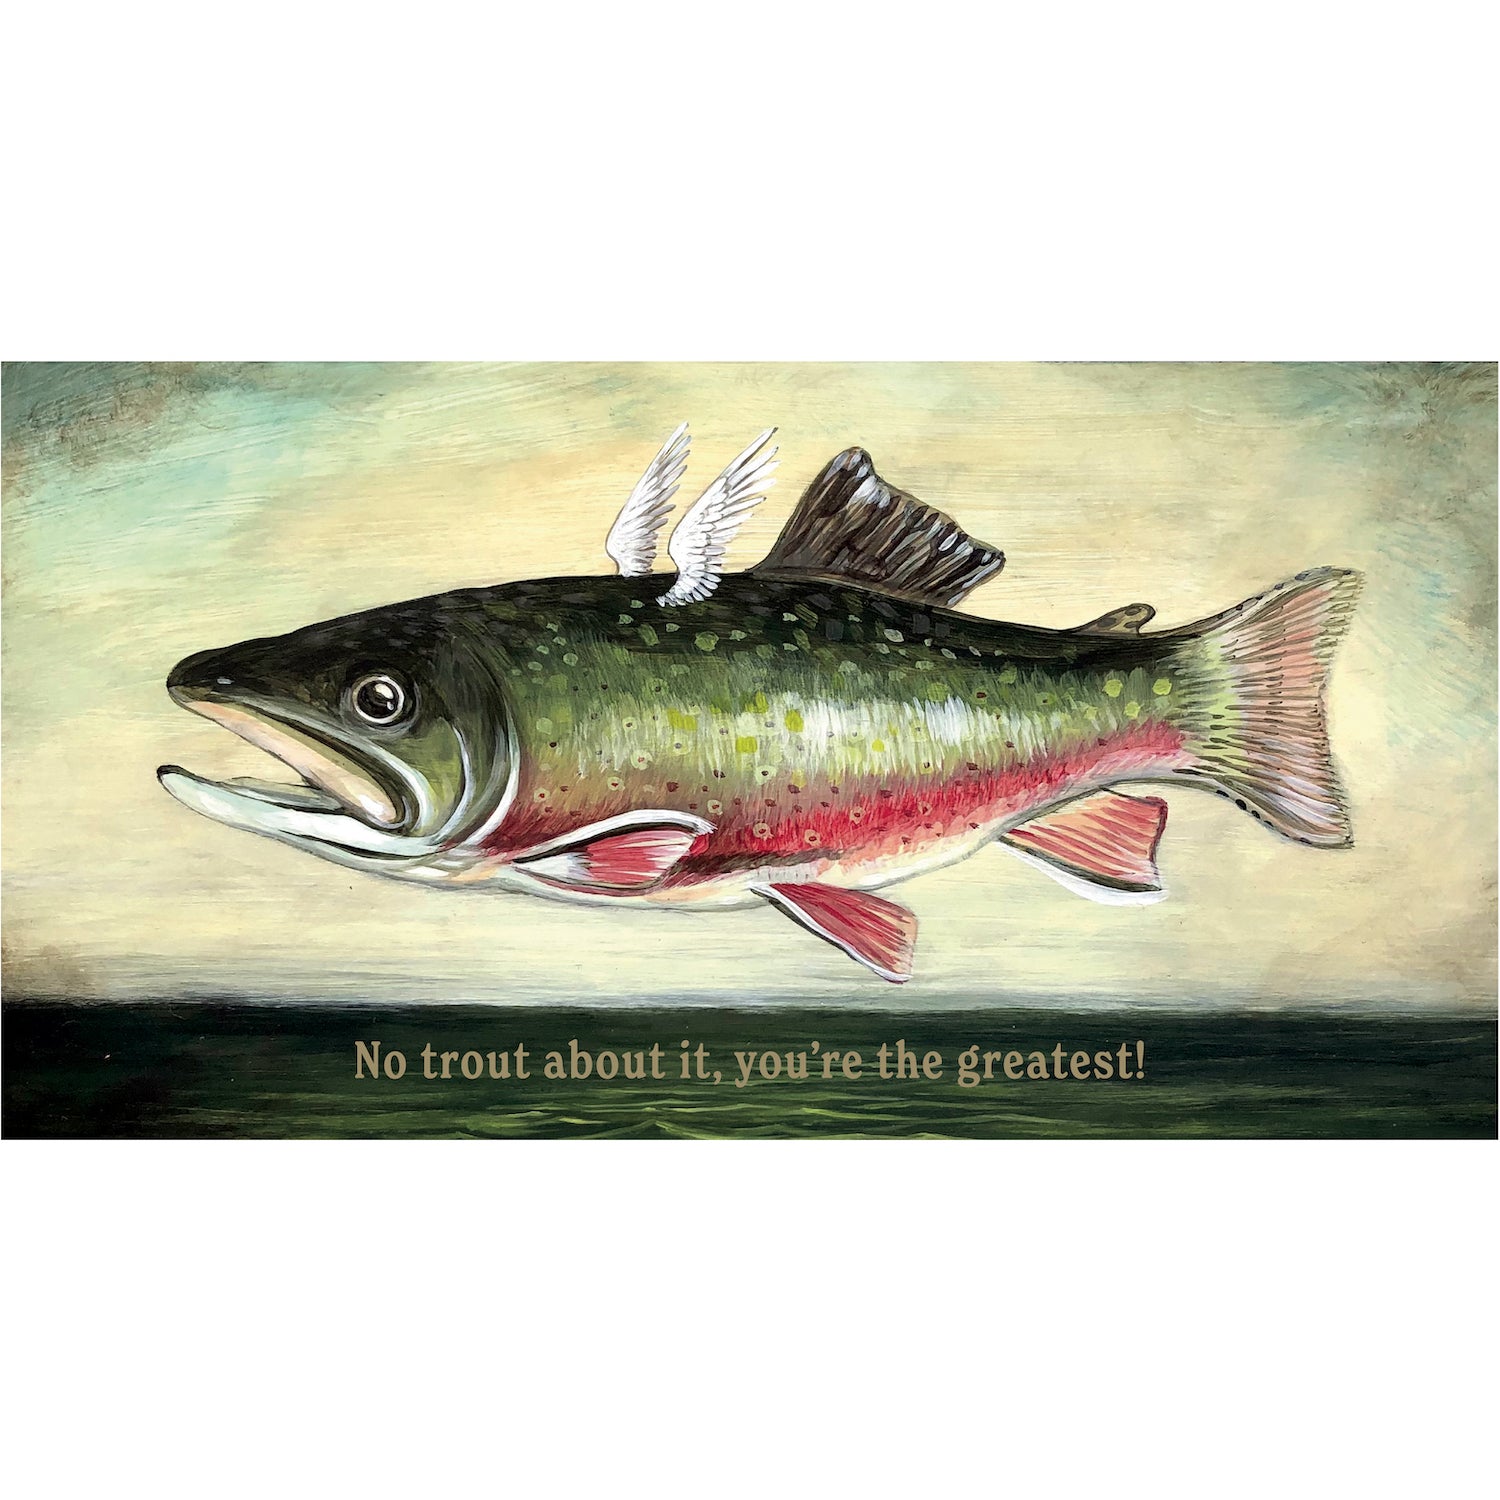 This folklore-inspired painting features the No Trout About It Card by Hester &amp; Cook, showcasing the notion that no trust is worth the greatest.